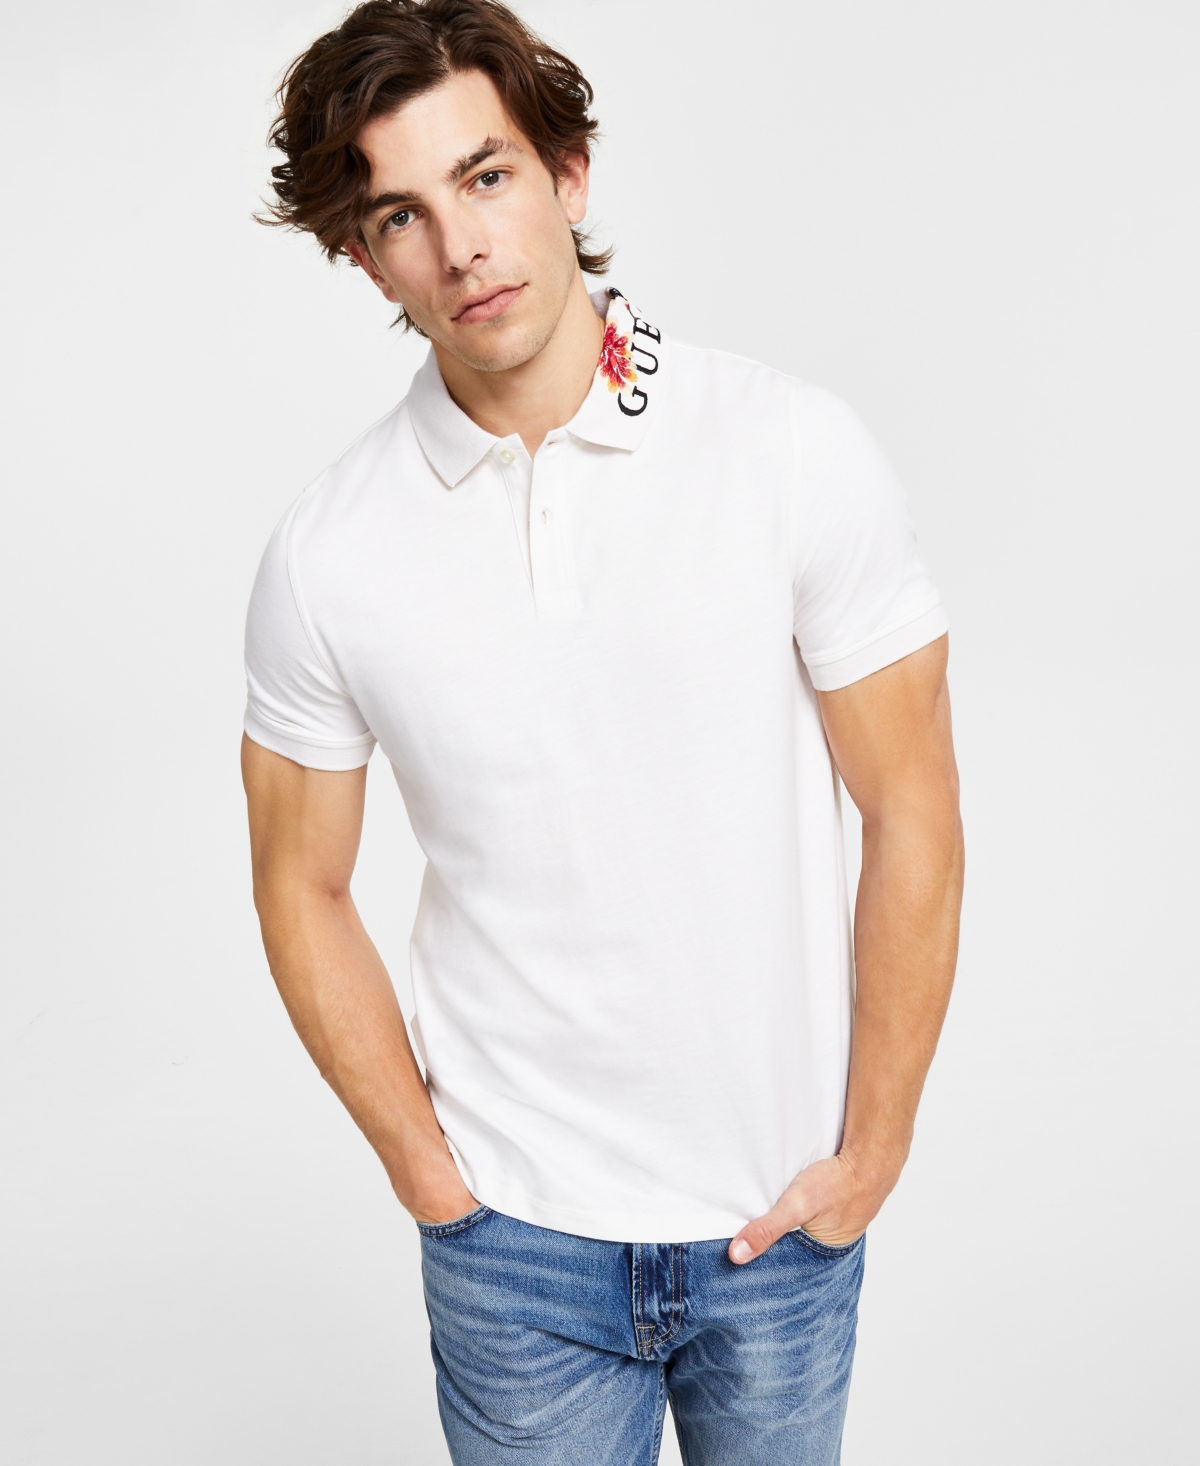 Guess Men's Embroidered Floral Short-sleeve Polo Shirt In Modular Ice